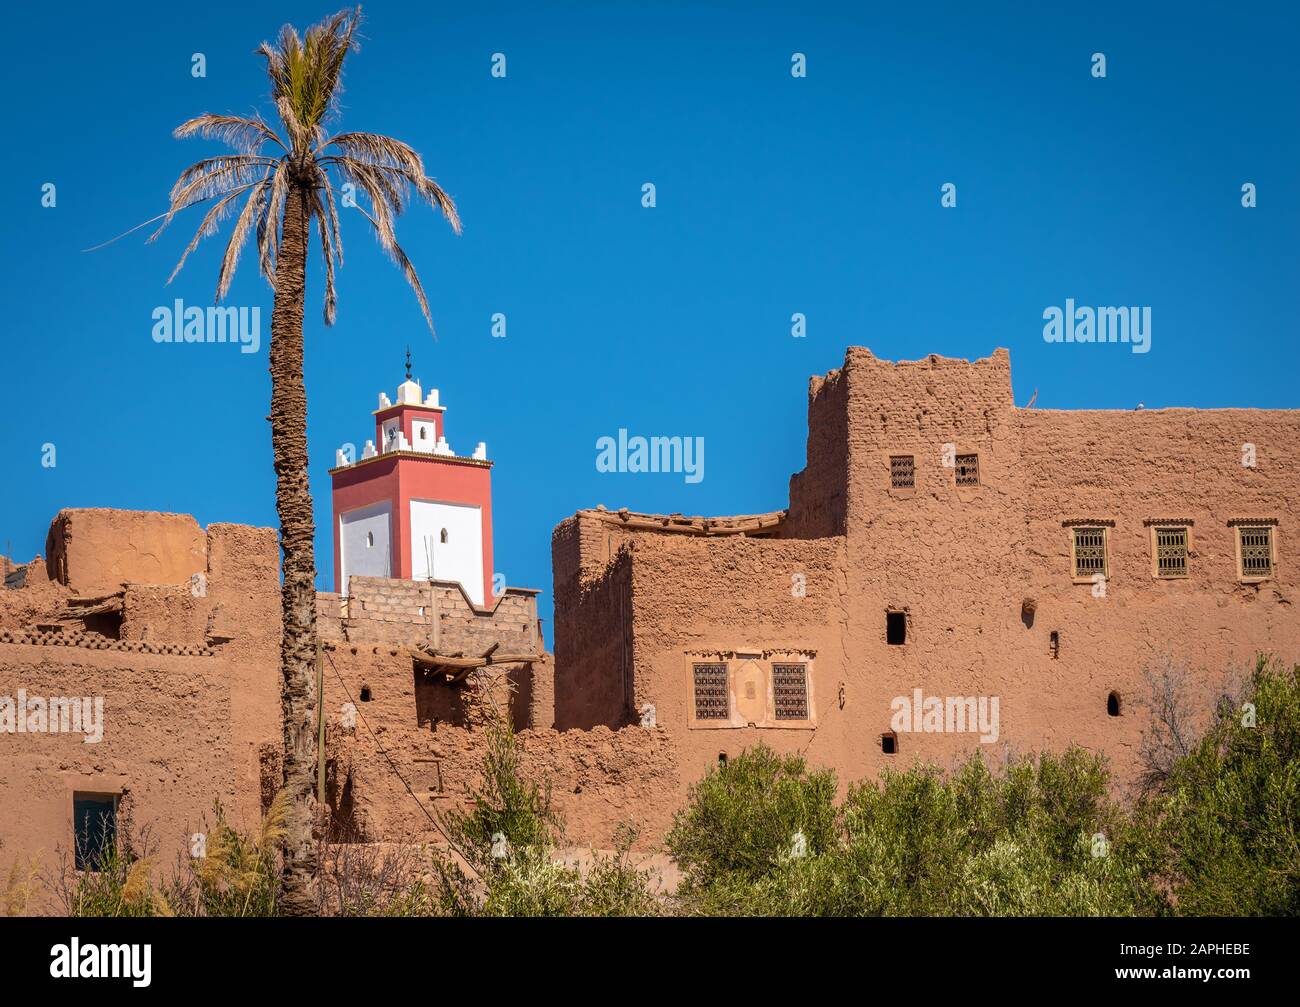 Adobe clay houses and blue sky, Tinghir, Morocco Stock Photo